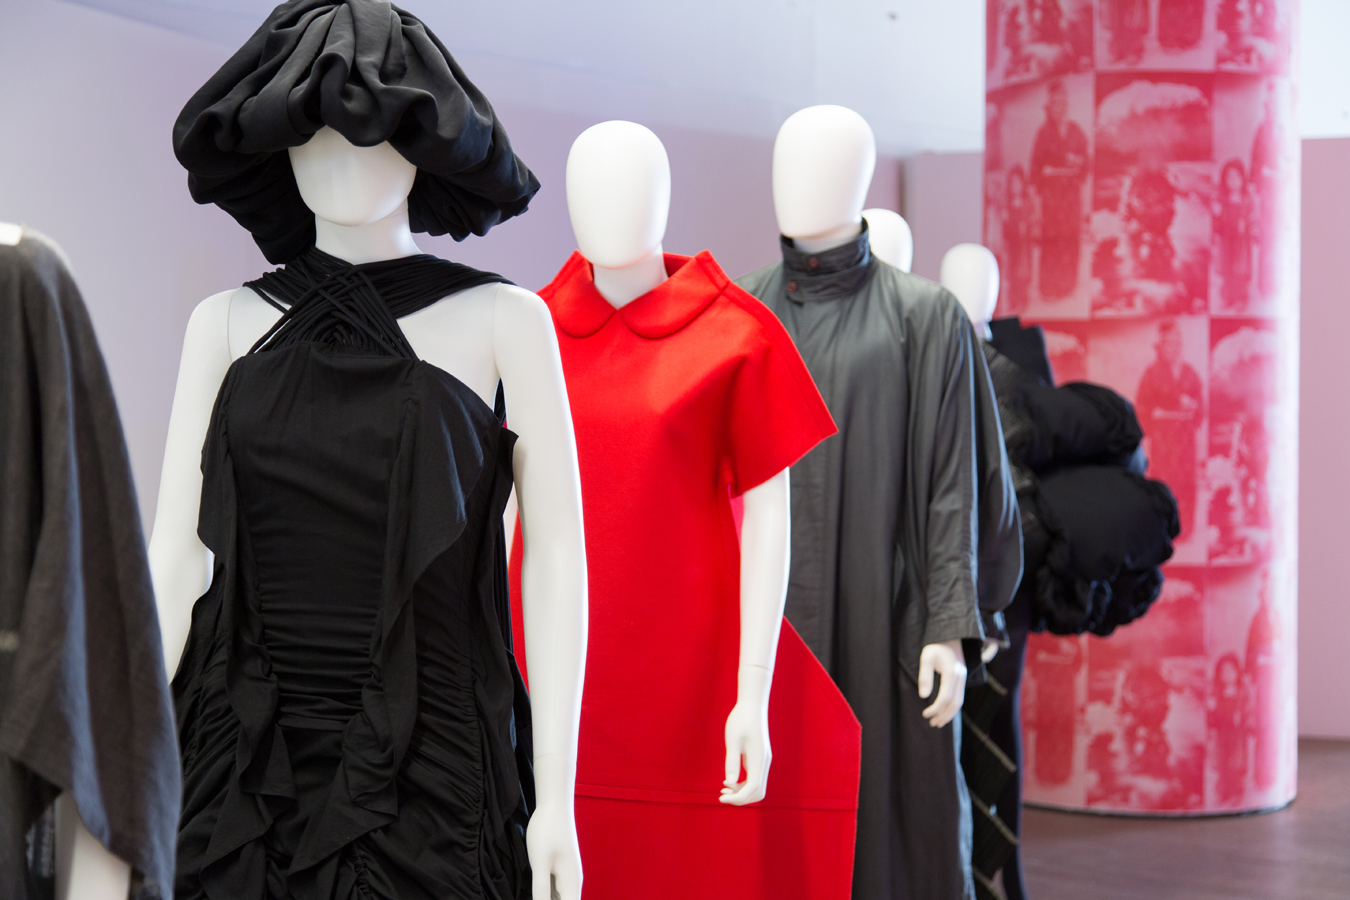 NUVO Daily Edit: Politics of Fashion at the Design Exchange